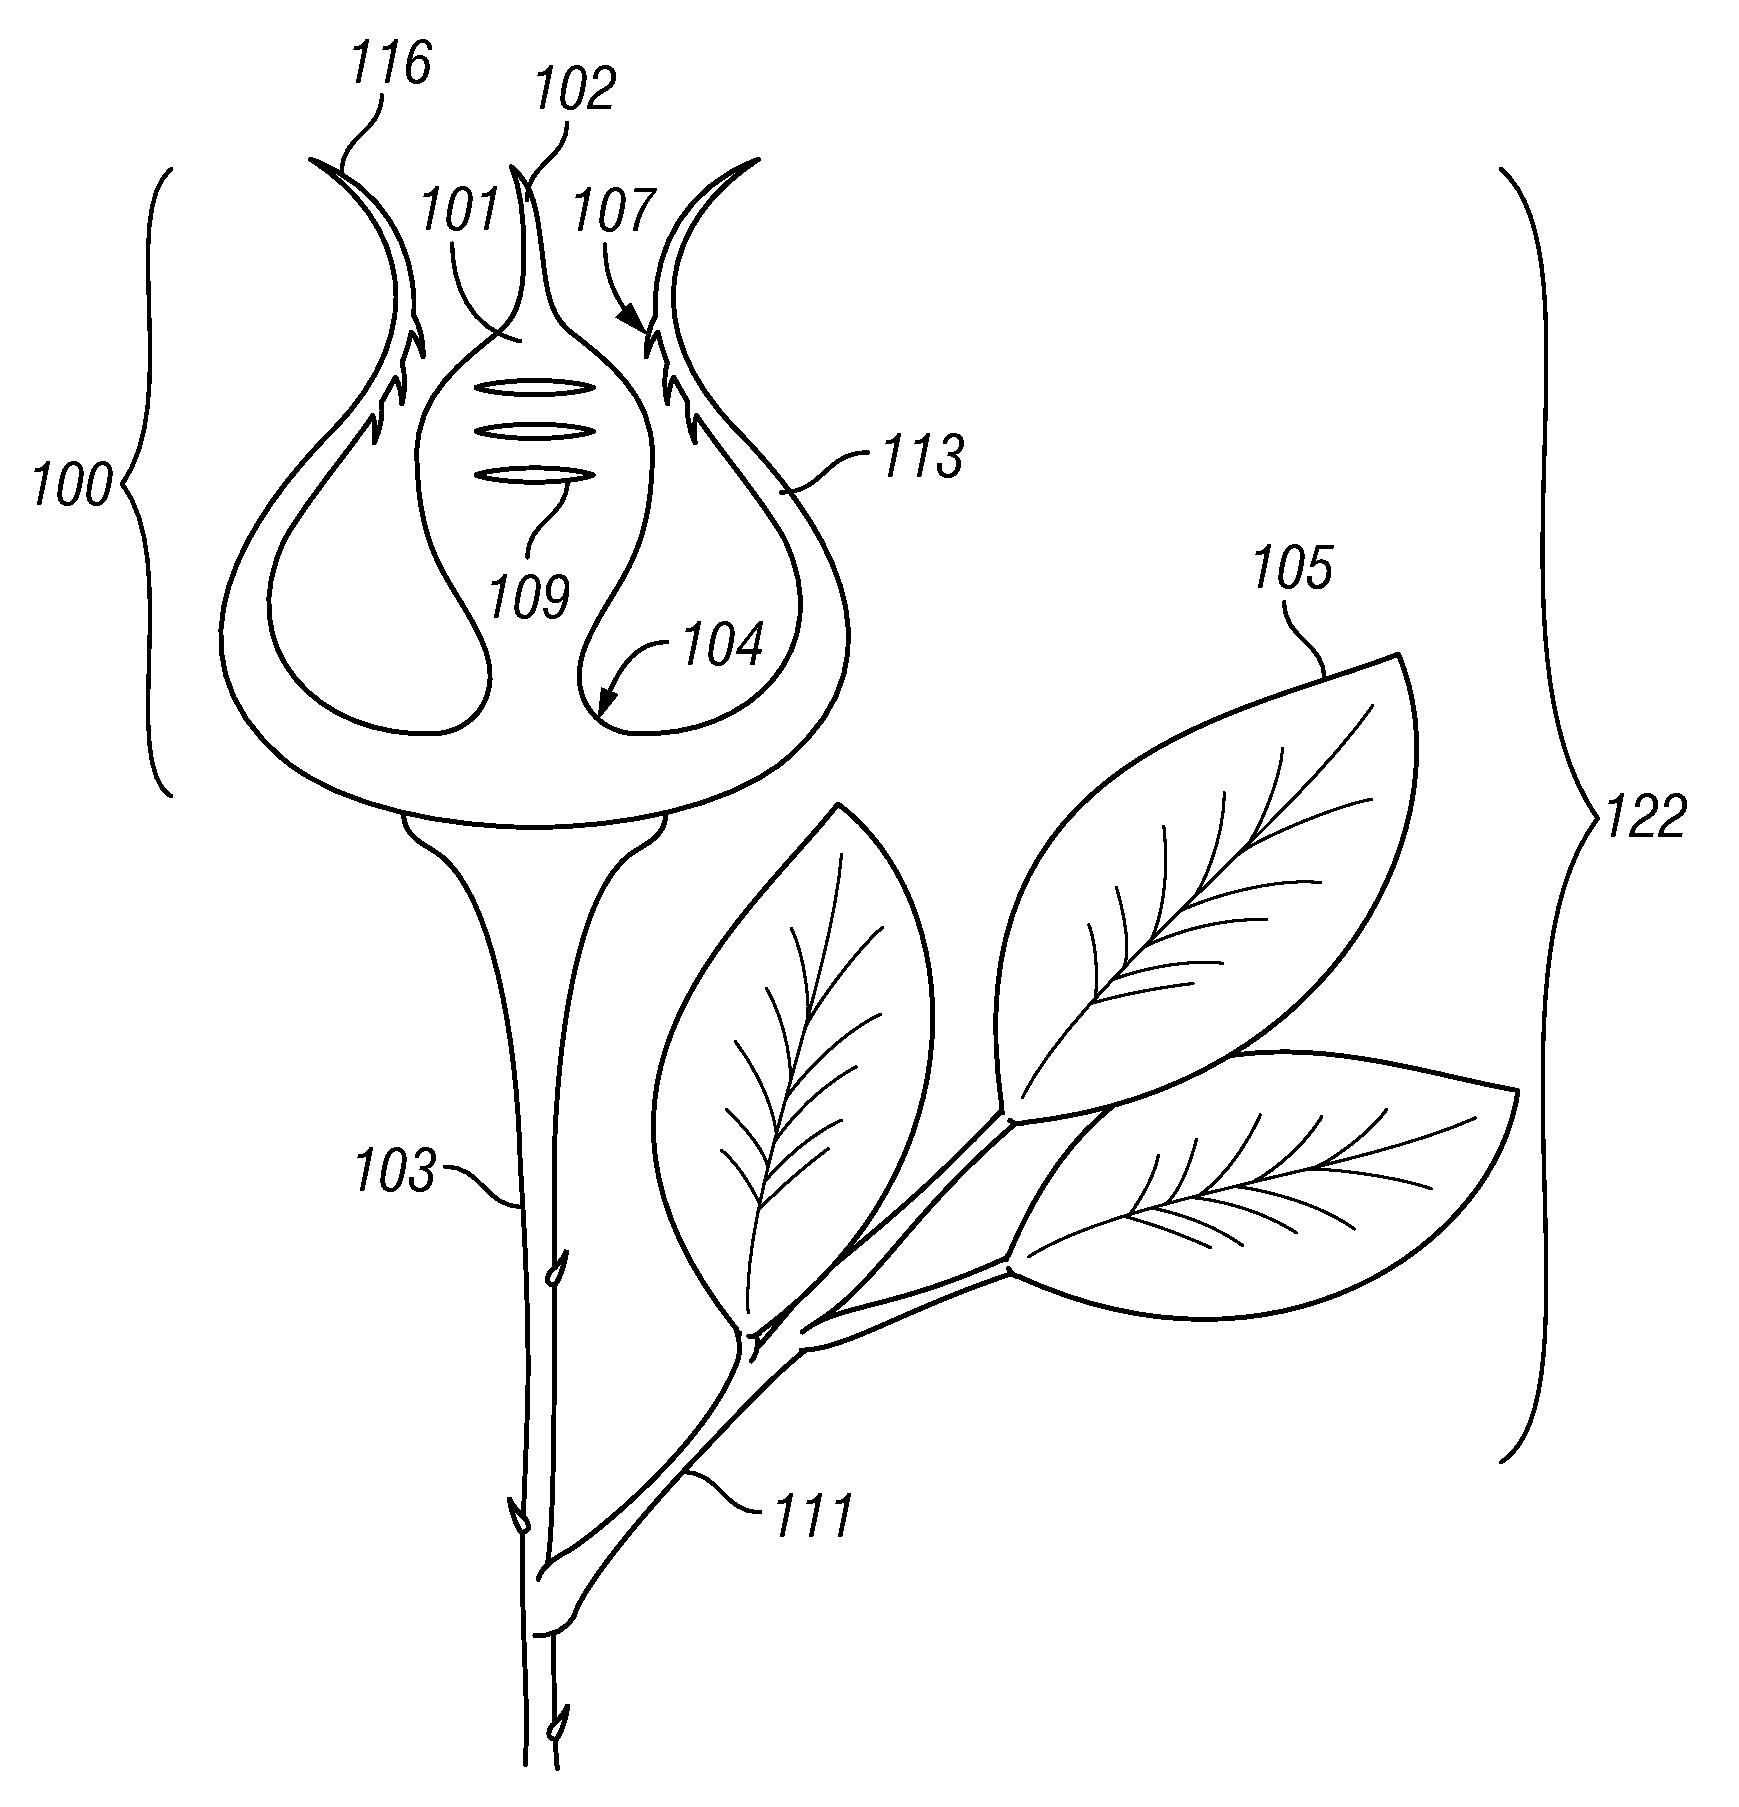 Novel reusable apparatus for affixing gift material to a presentation device